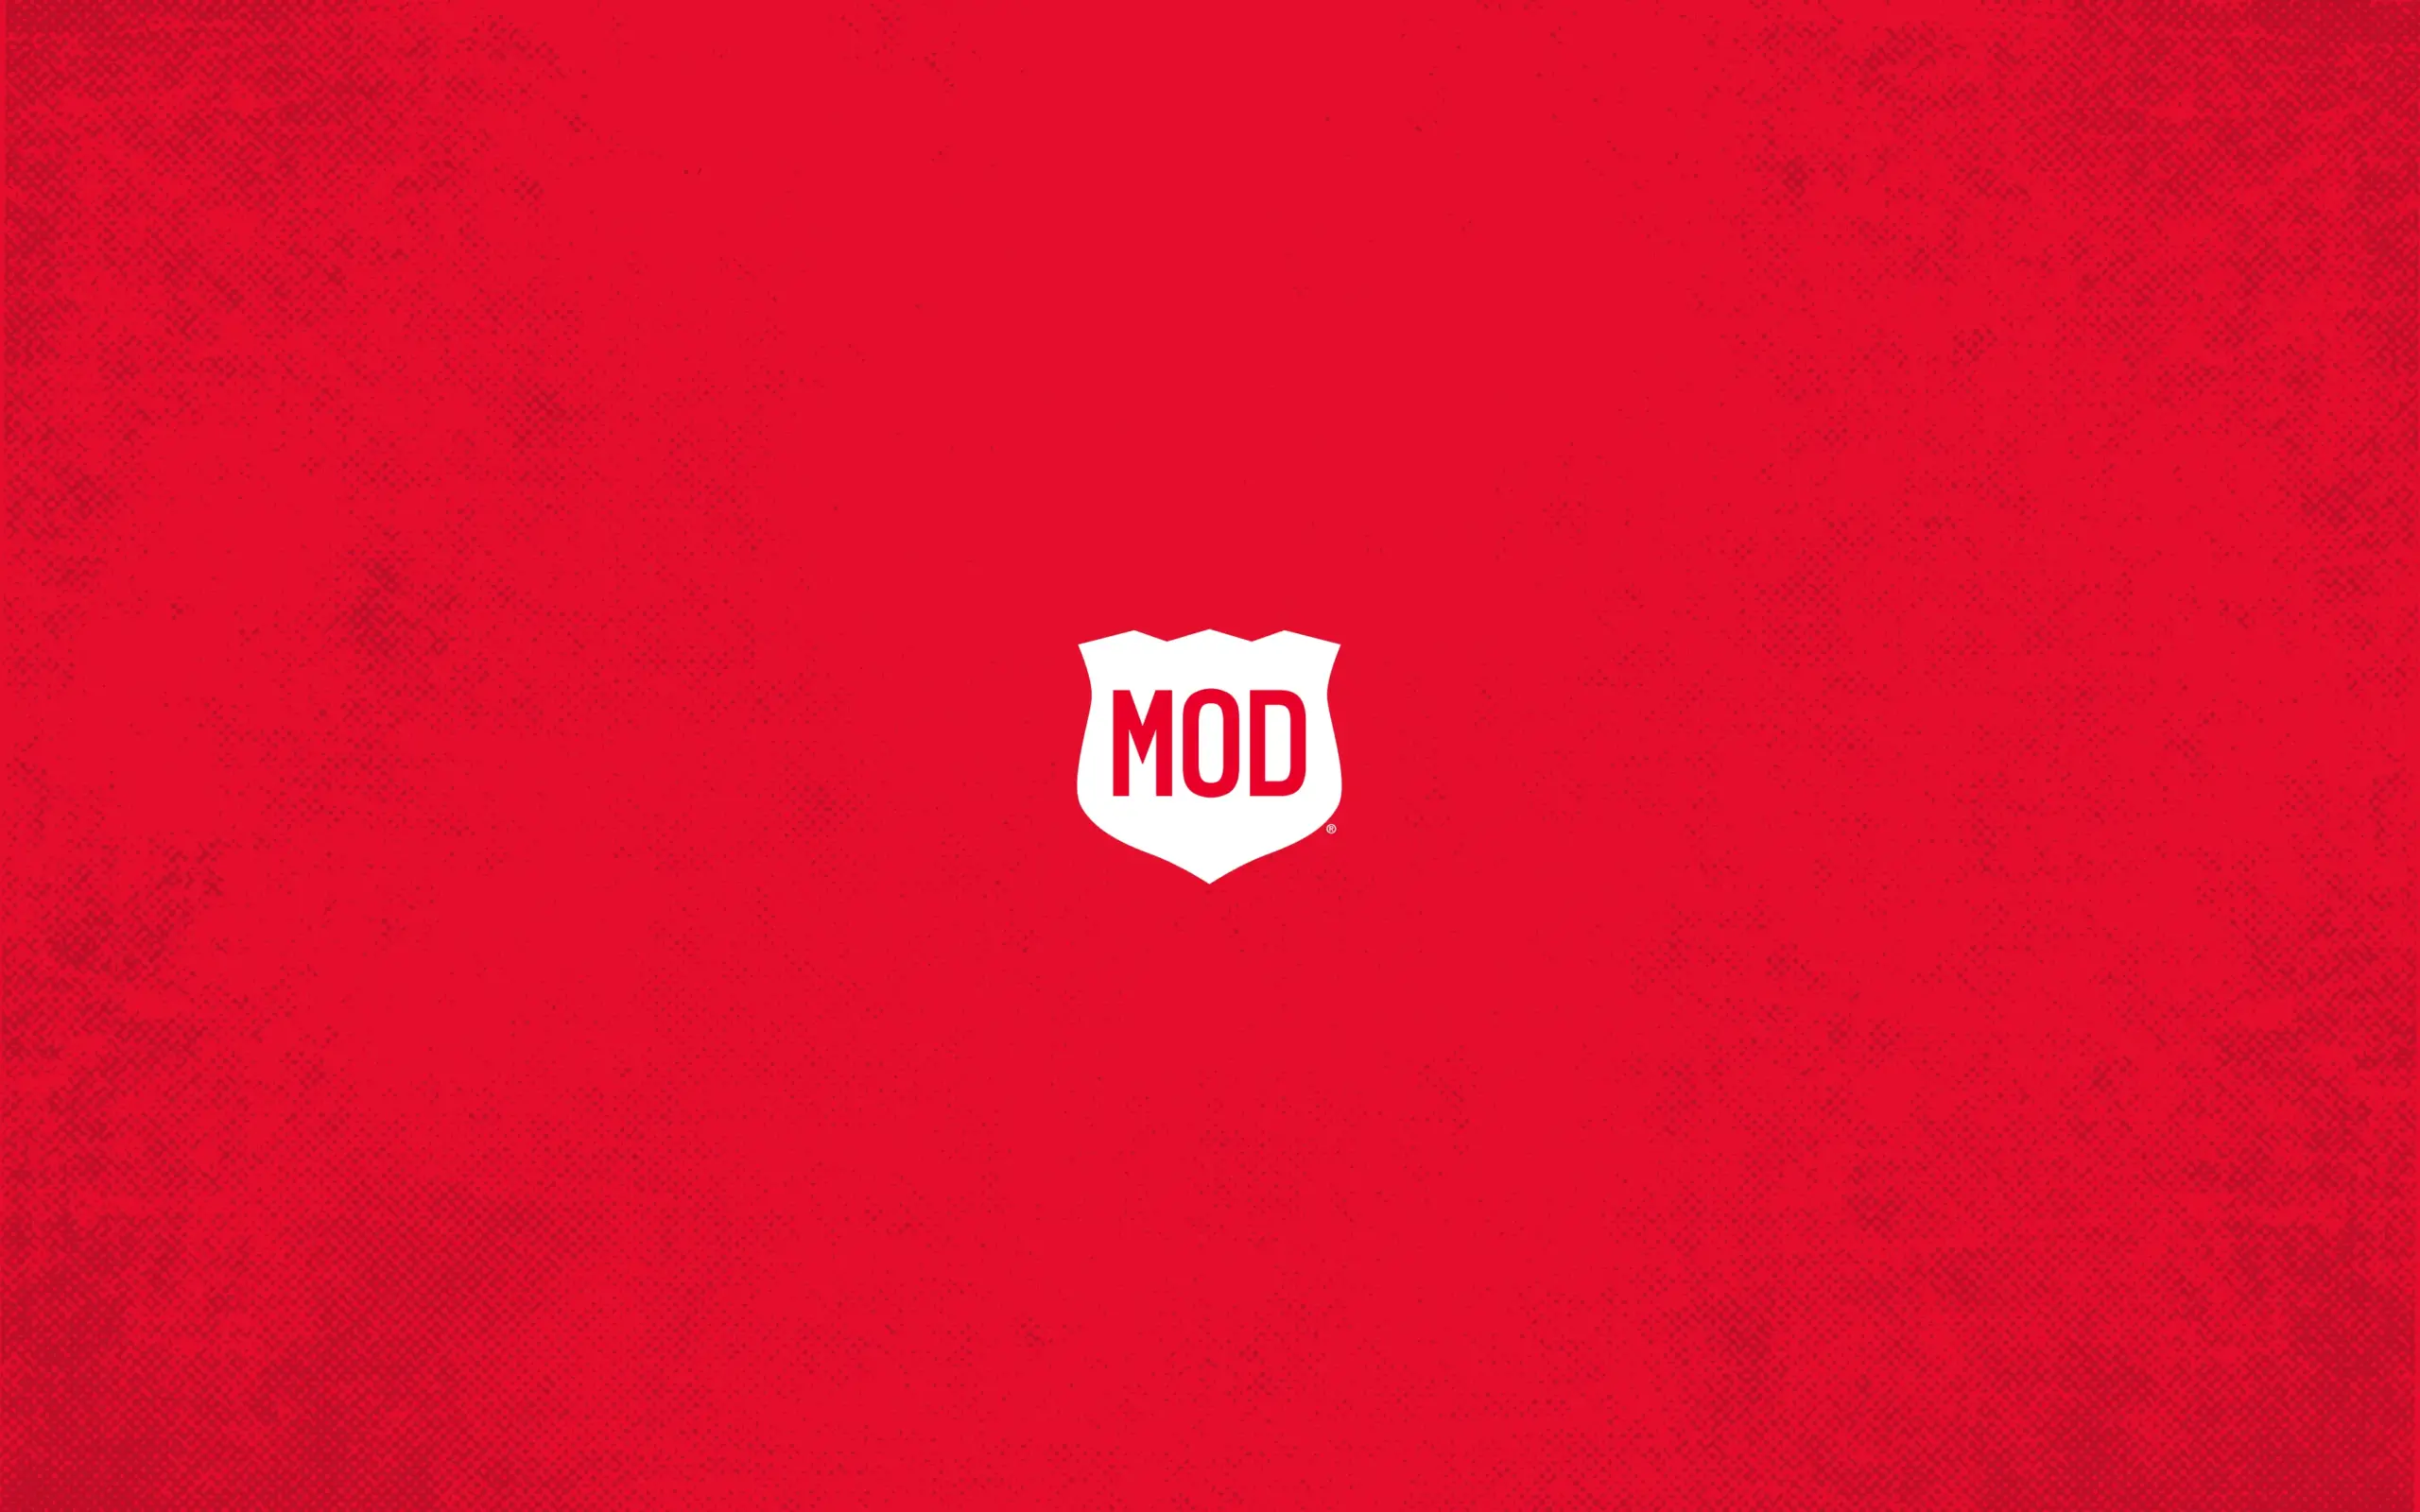 MOD Pizza logo on abstract red background